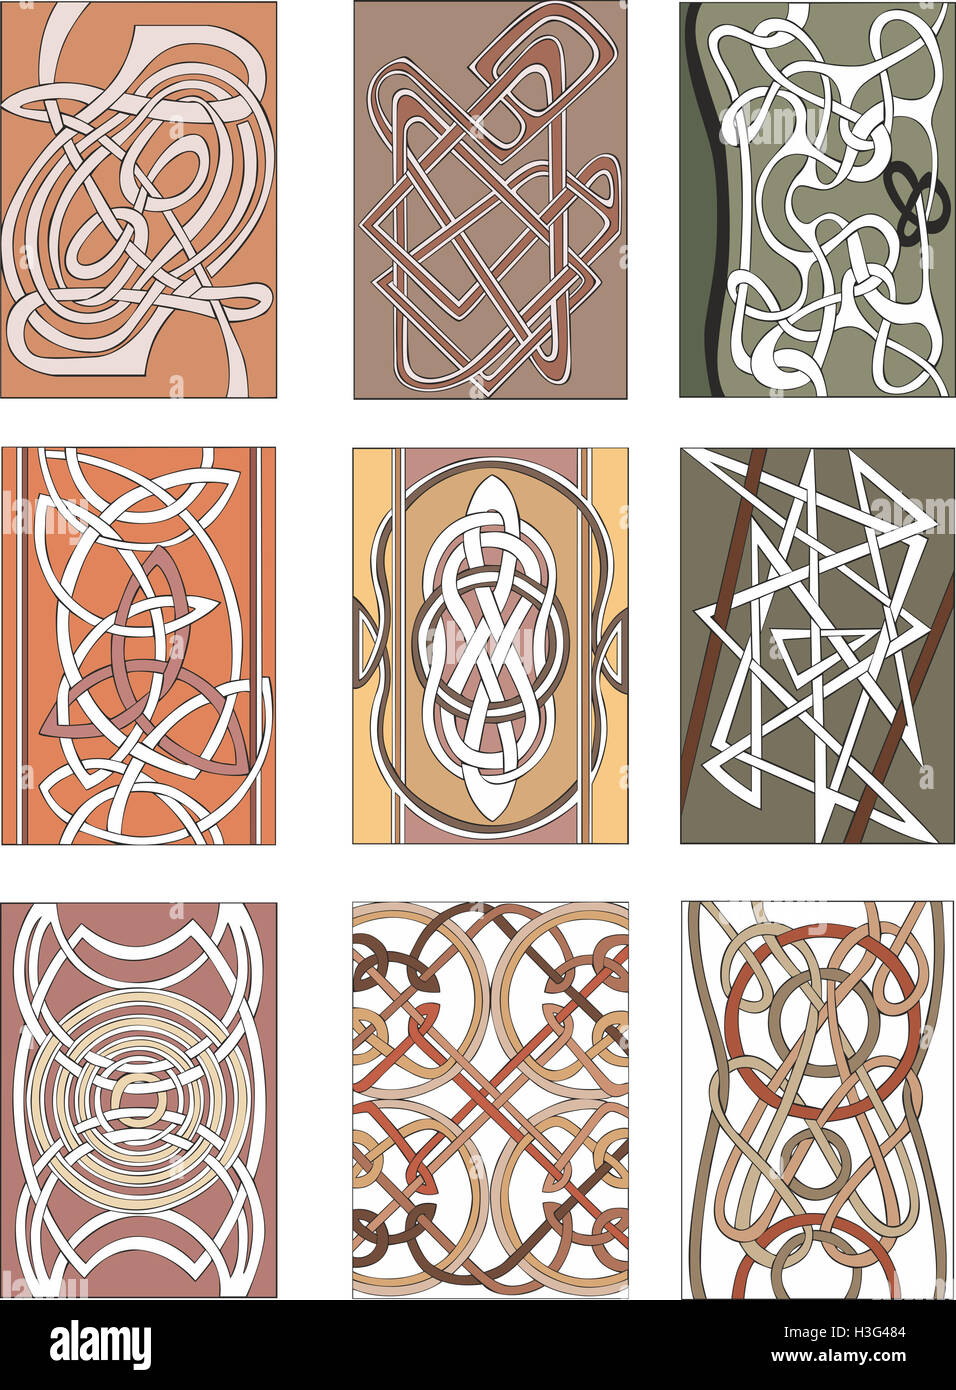 Set of nine vertical knot decorative patterns in miscellaneous artistic styles for illustrative purposes Stock Photo